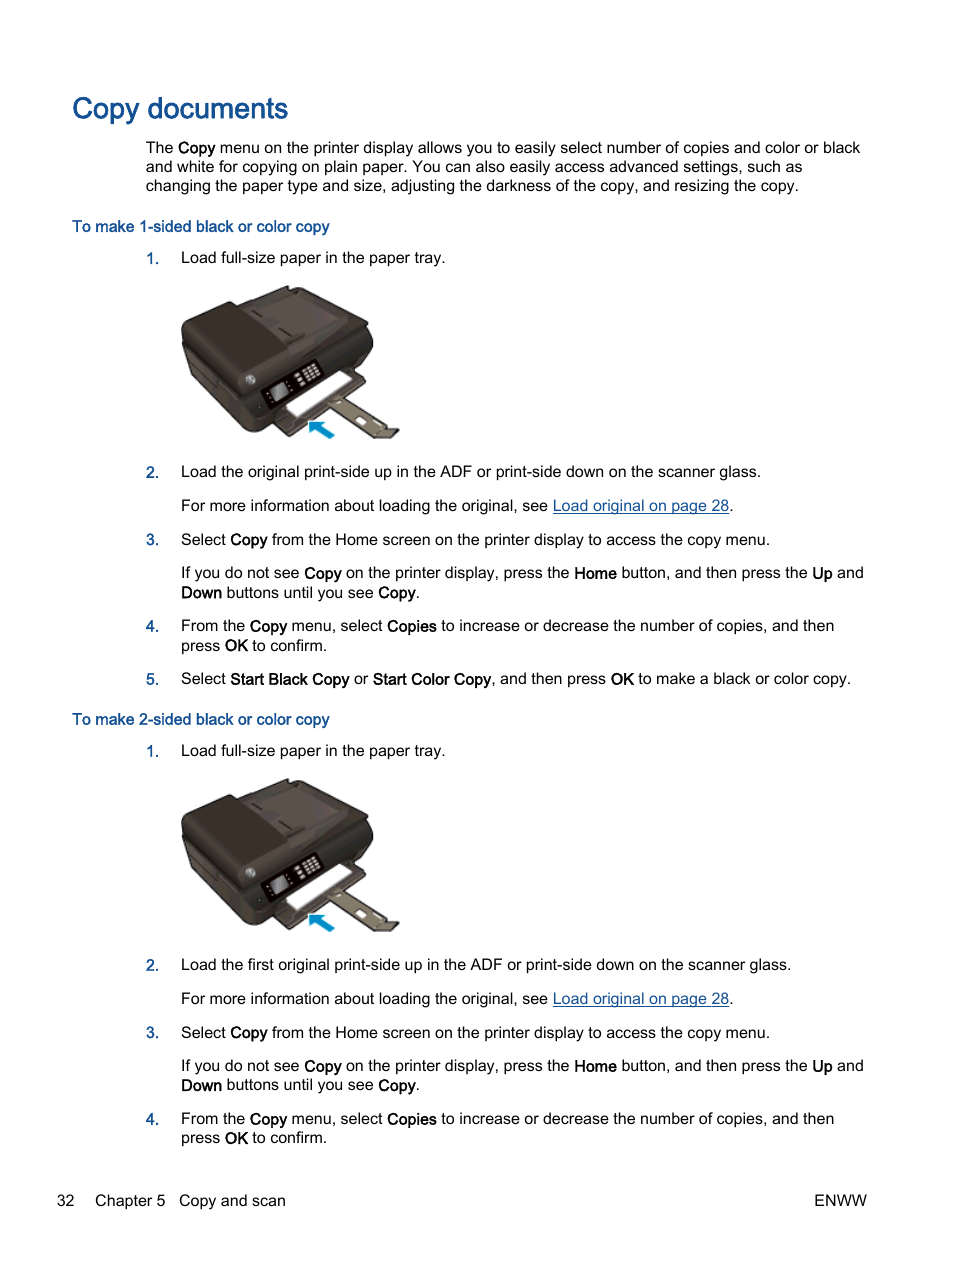 Copy documents | HP Officejet 4630 e-All-in-One Printer User Manual